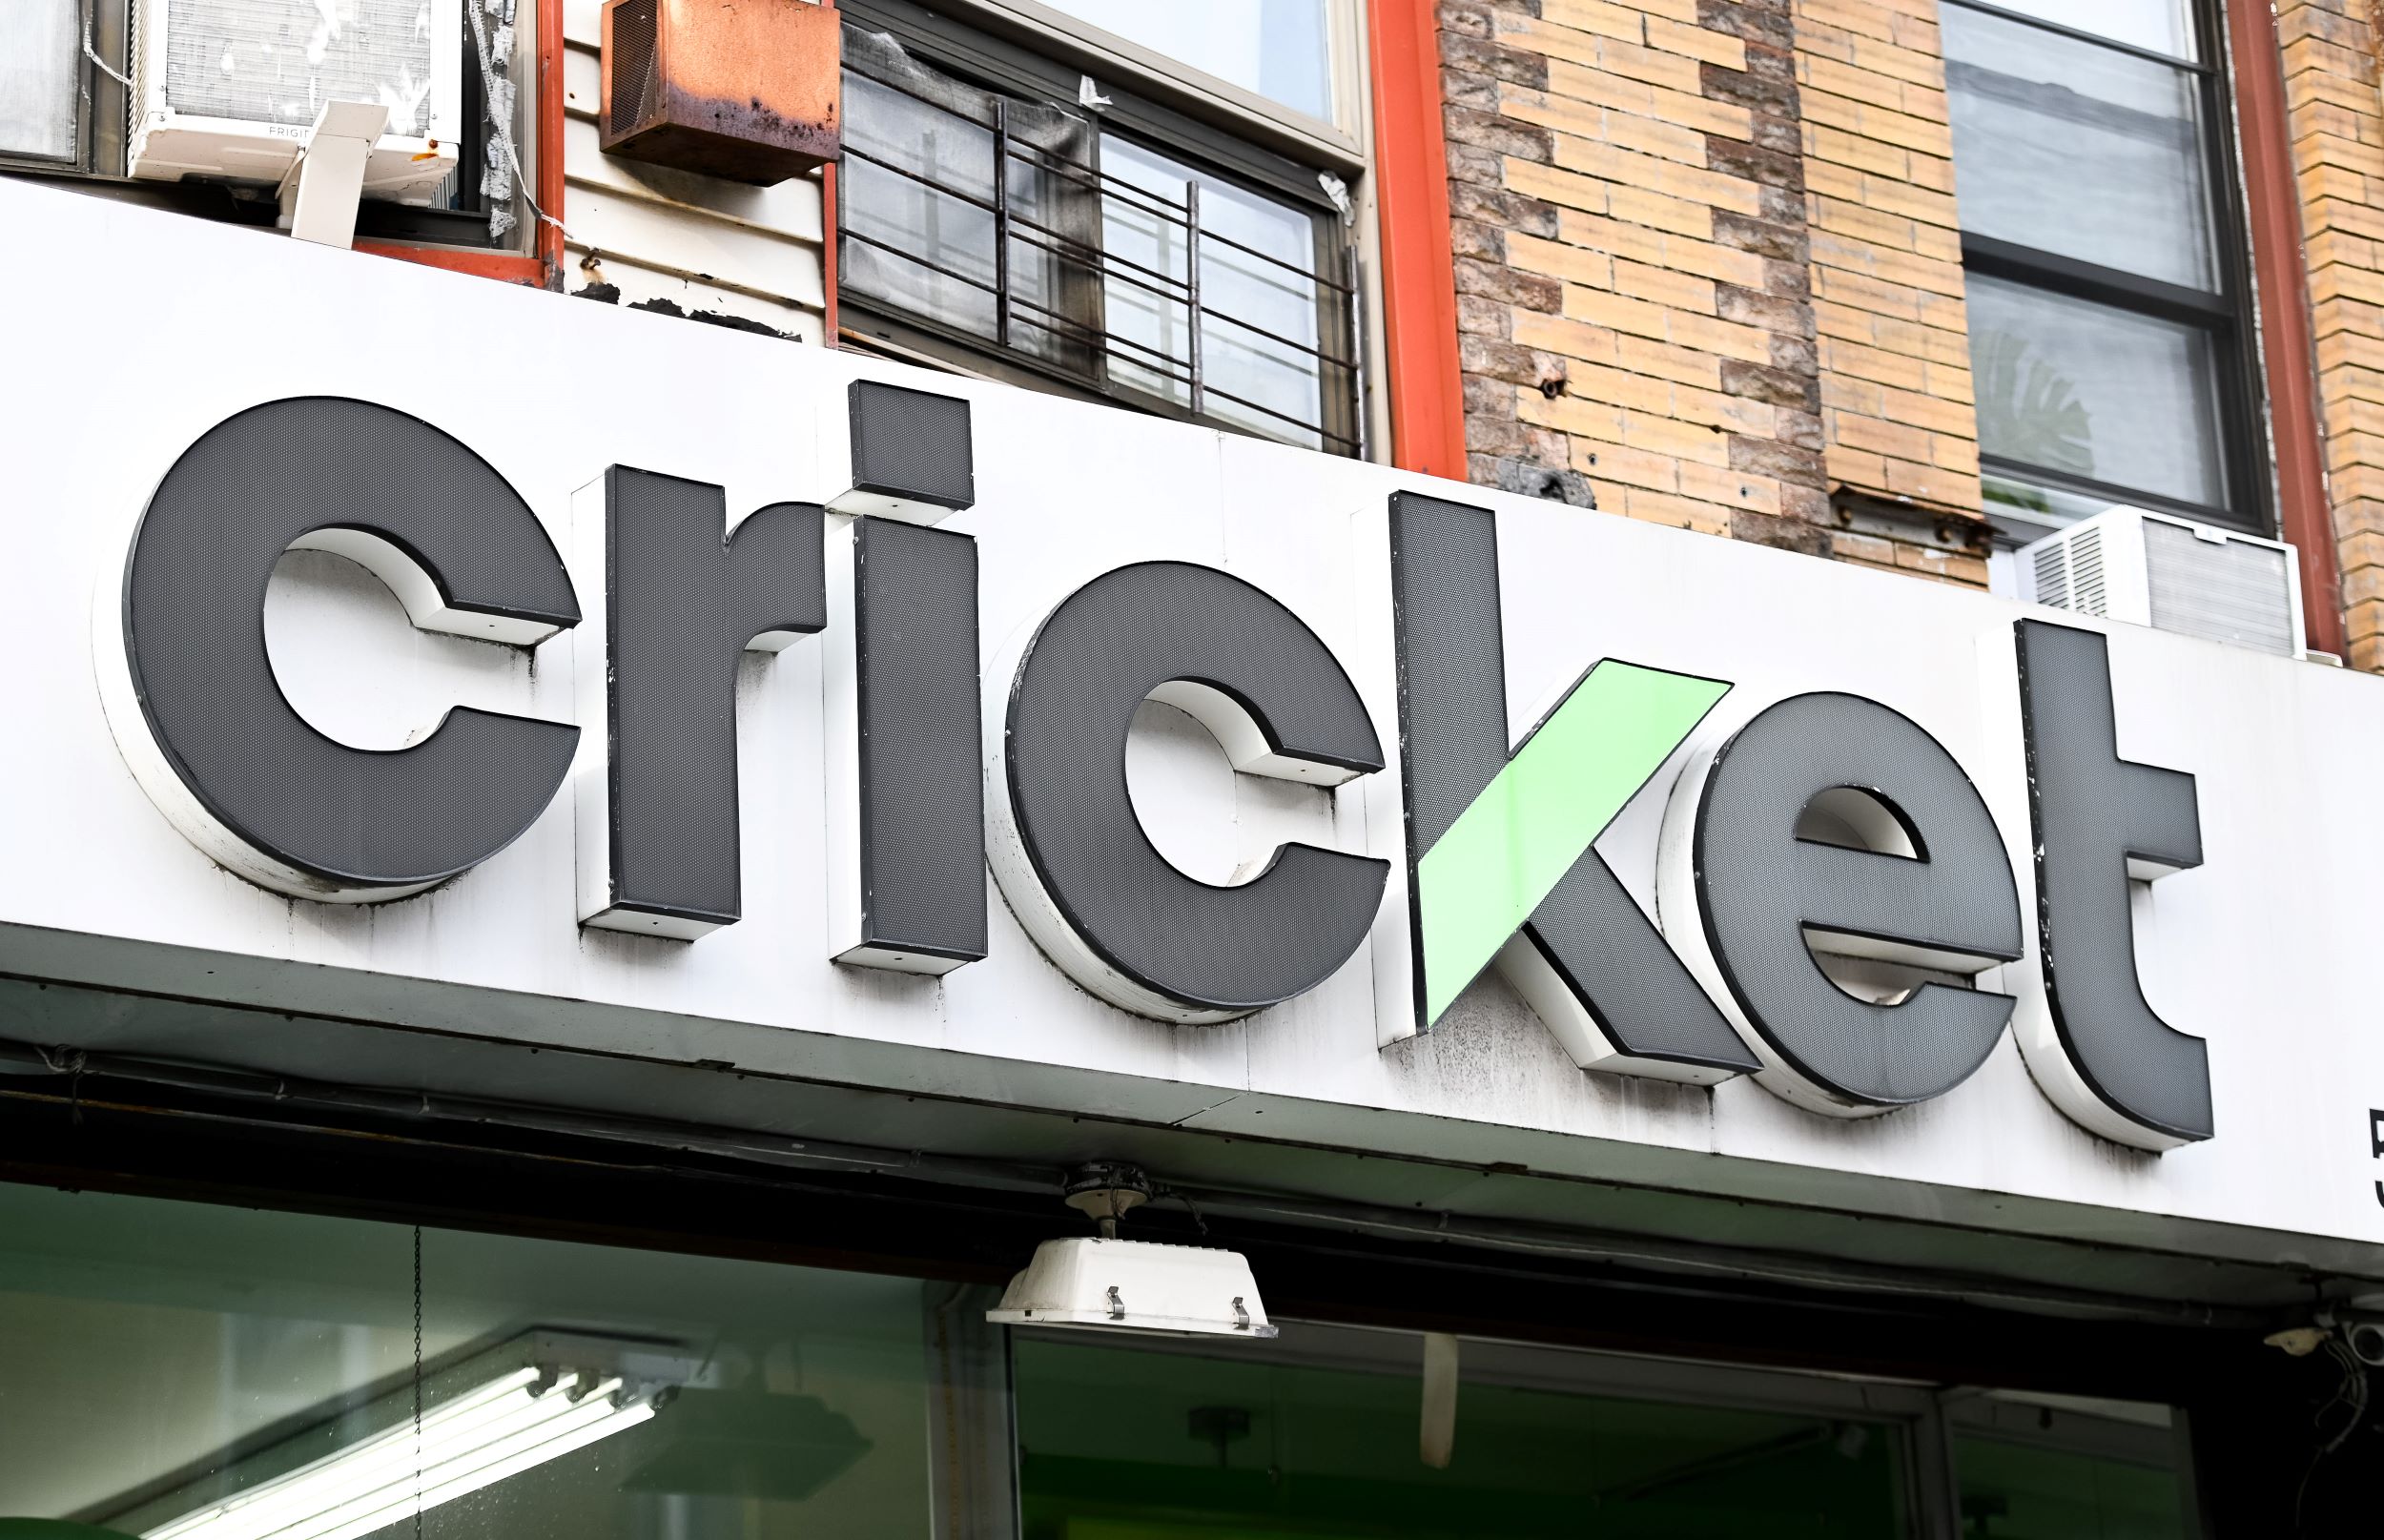 Signage with the word "cricket" in bold, three-dimensional letters mounted on a store facade, featuring large windows and part of an air conditioner unit visible.